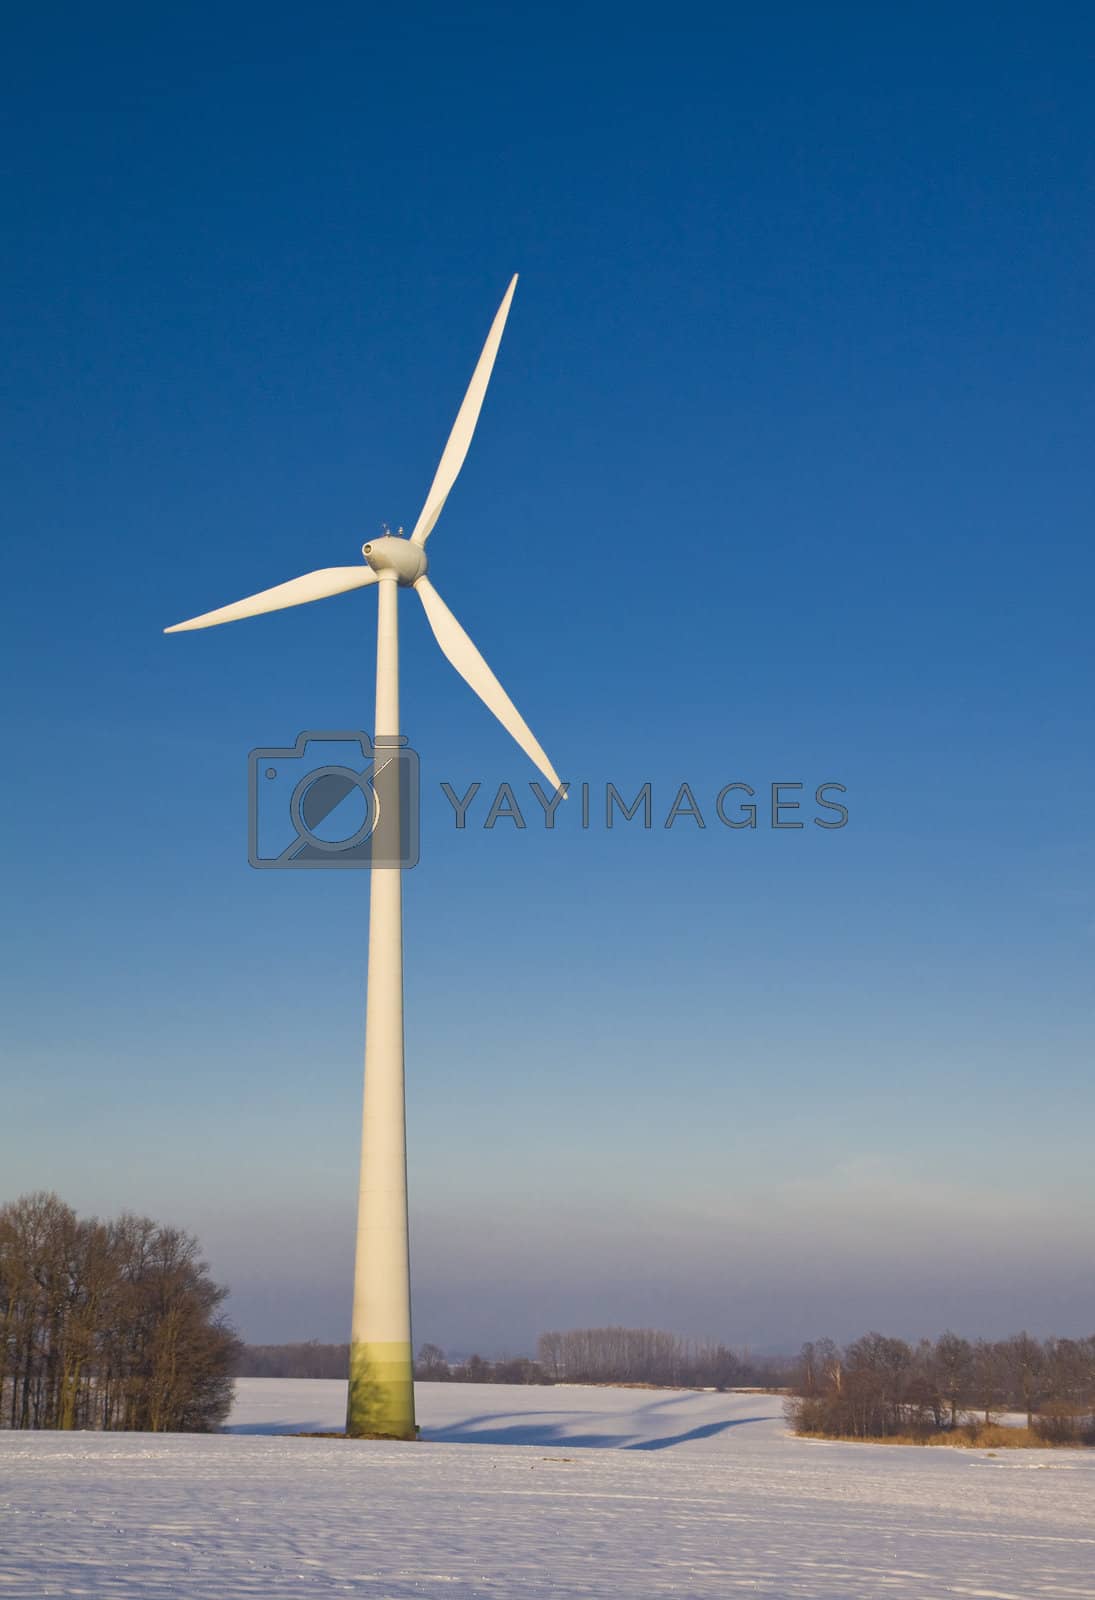 Royalty free image of Windmill in winter by Gbuglok